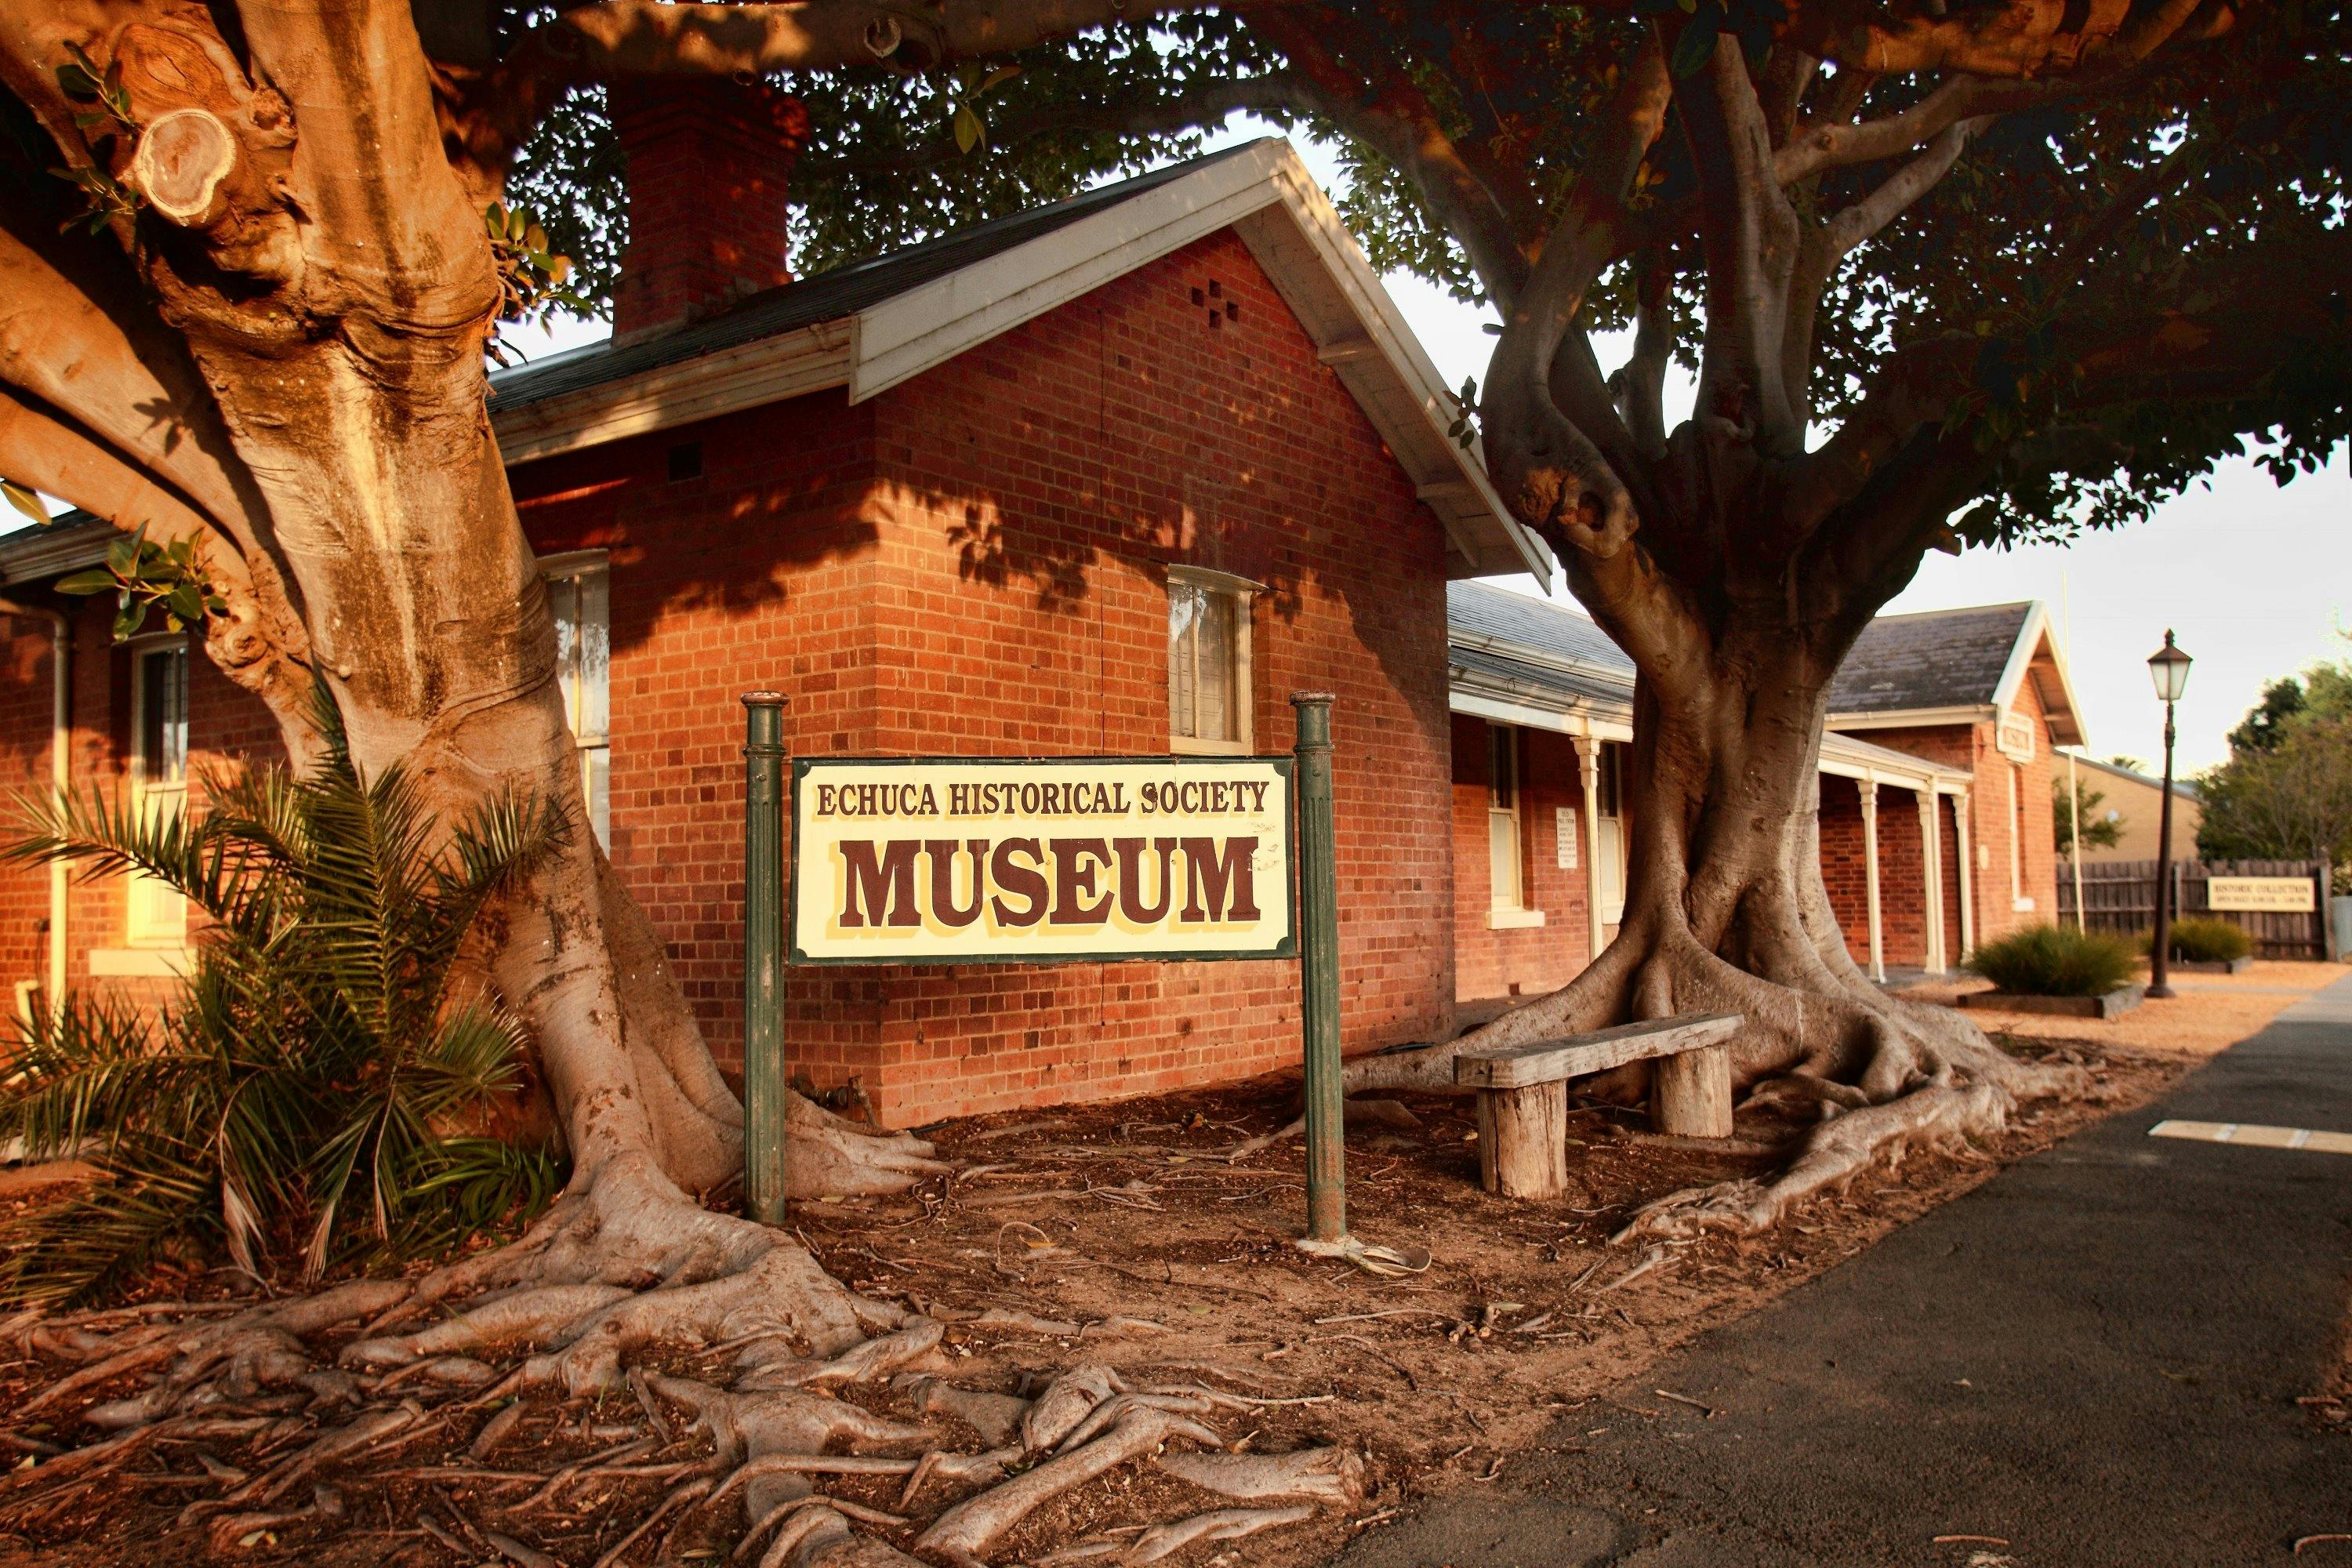 Echuca Historical Society Museum and Archive